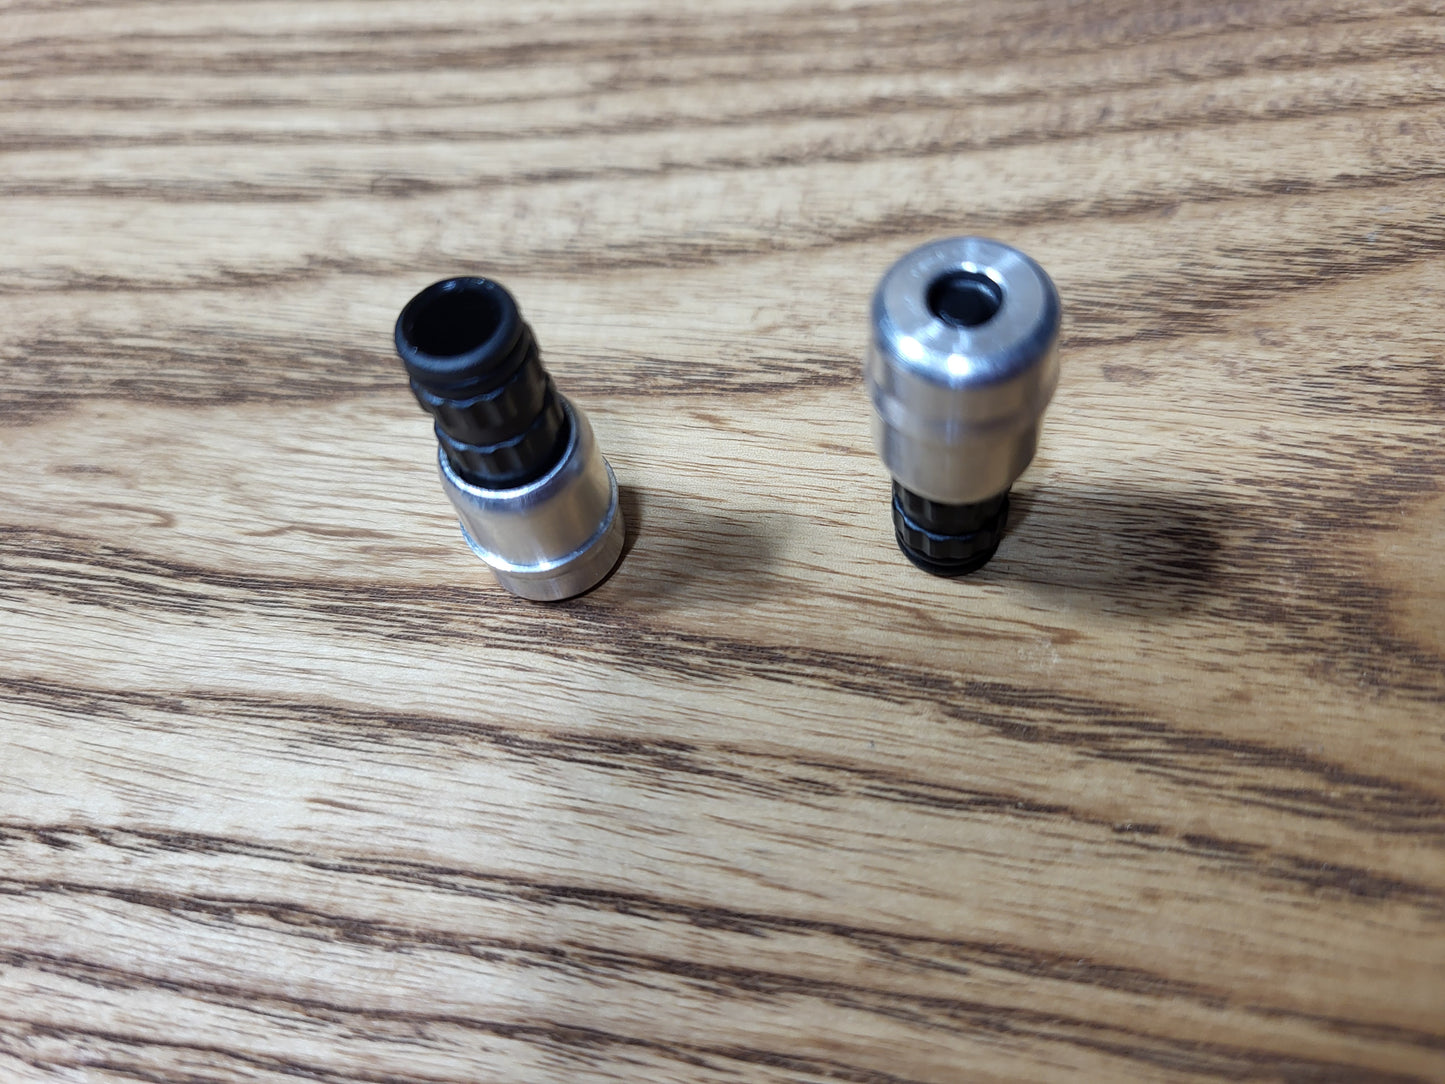 Inflation Valves (replacement set)